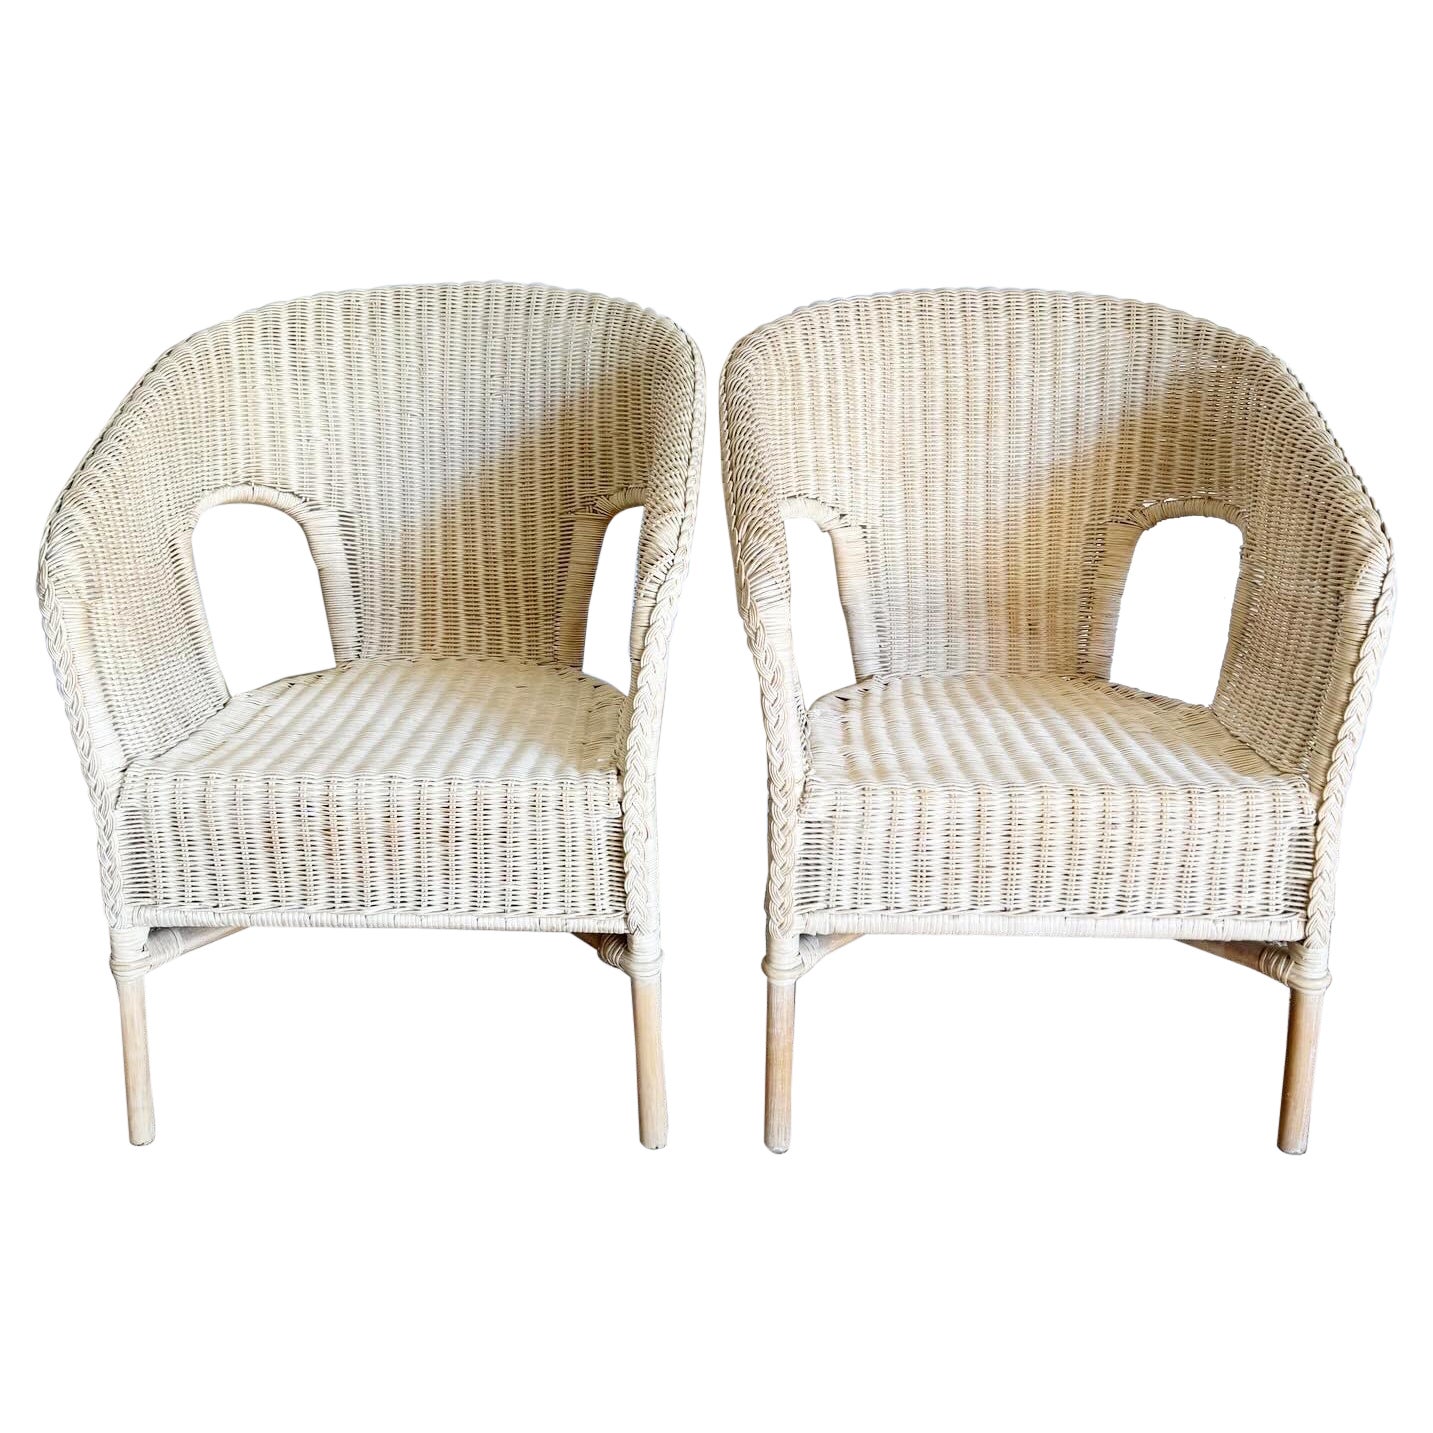 Boho Chic White Washed Wicker and Rattan Lounge Chairs - a Pair